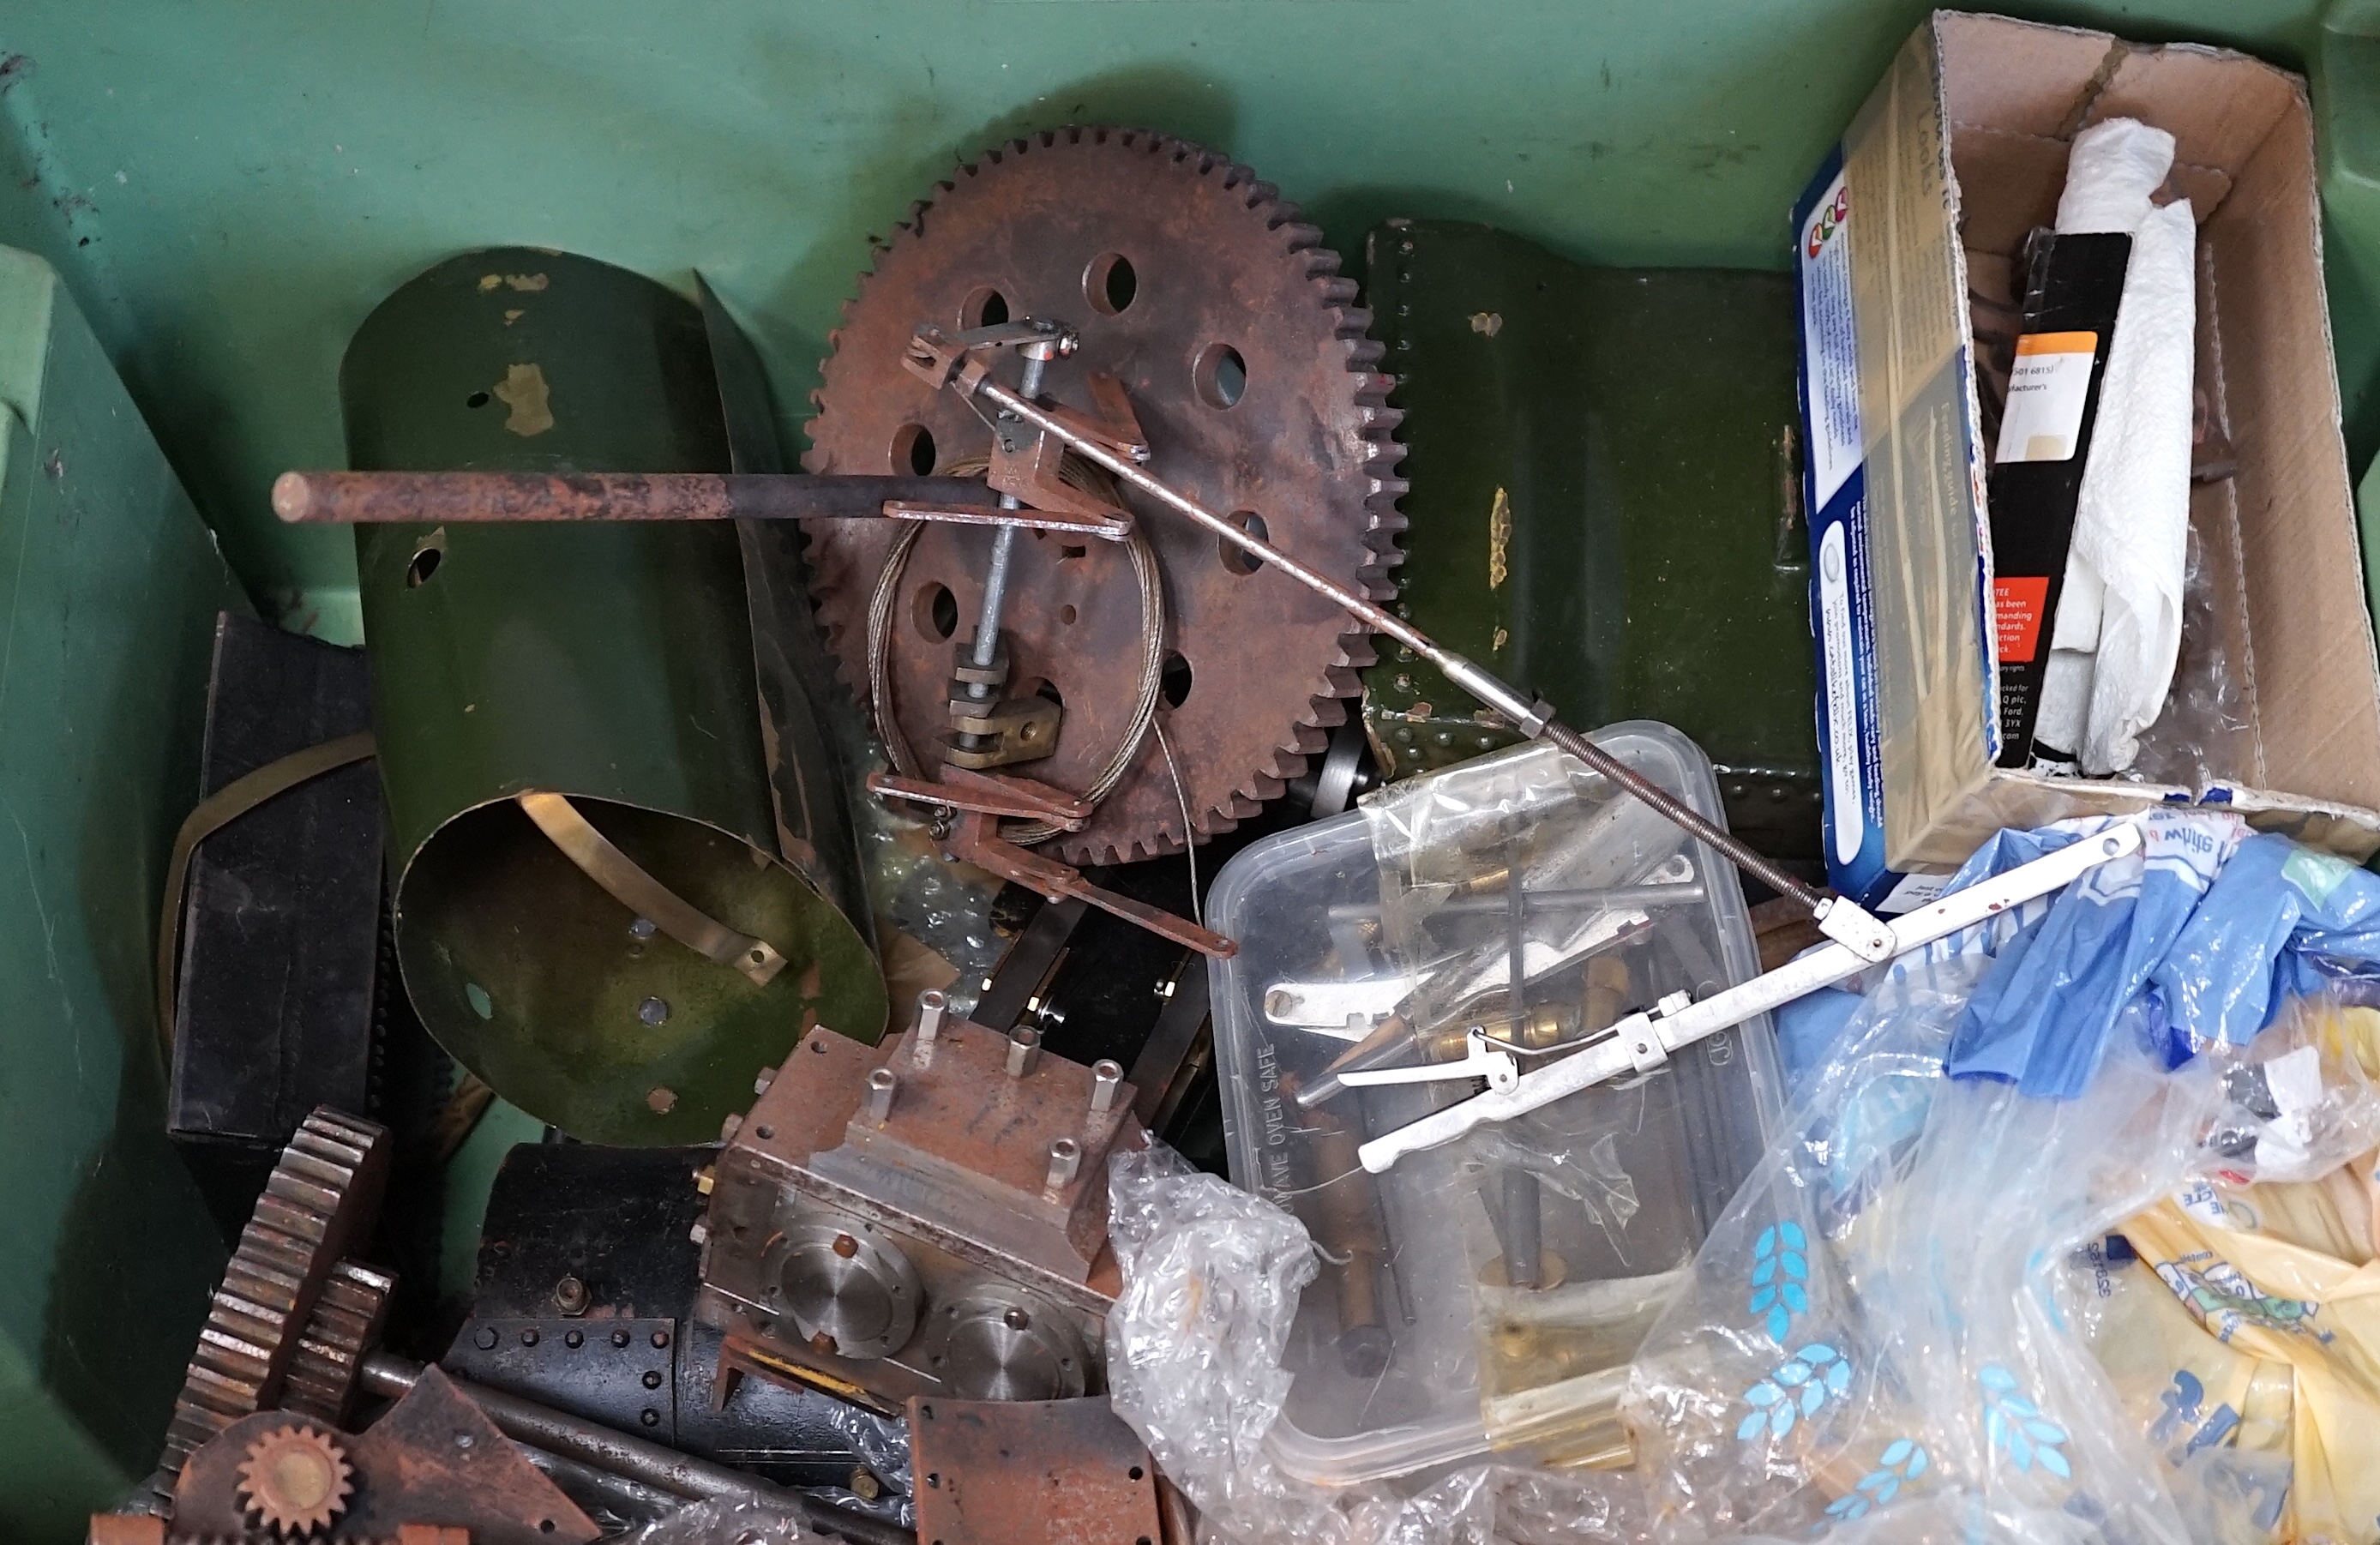 A deconstructed 1.5 inch scale Fowler live steam traction engine, the major parts appear to be present and it comes with photographs and a short description from when it was previously sold